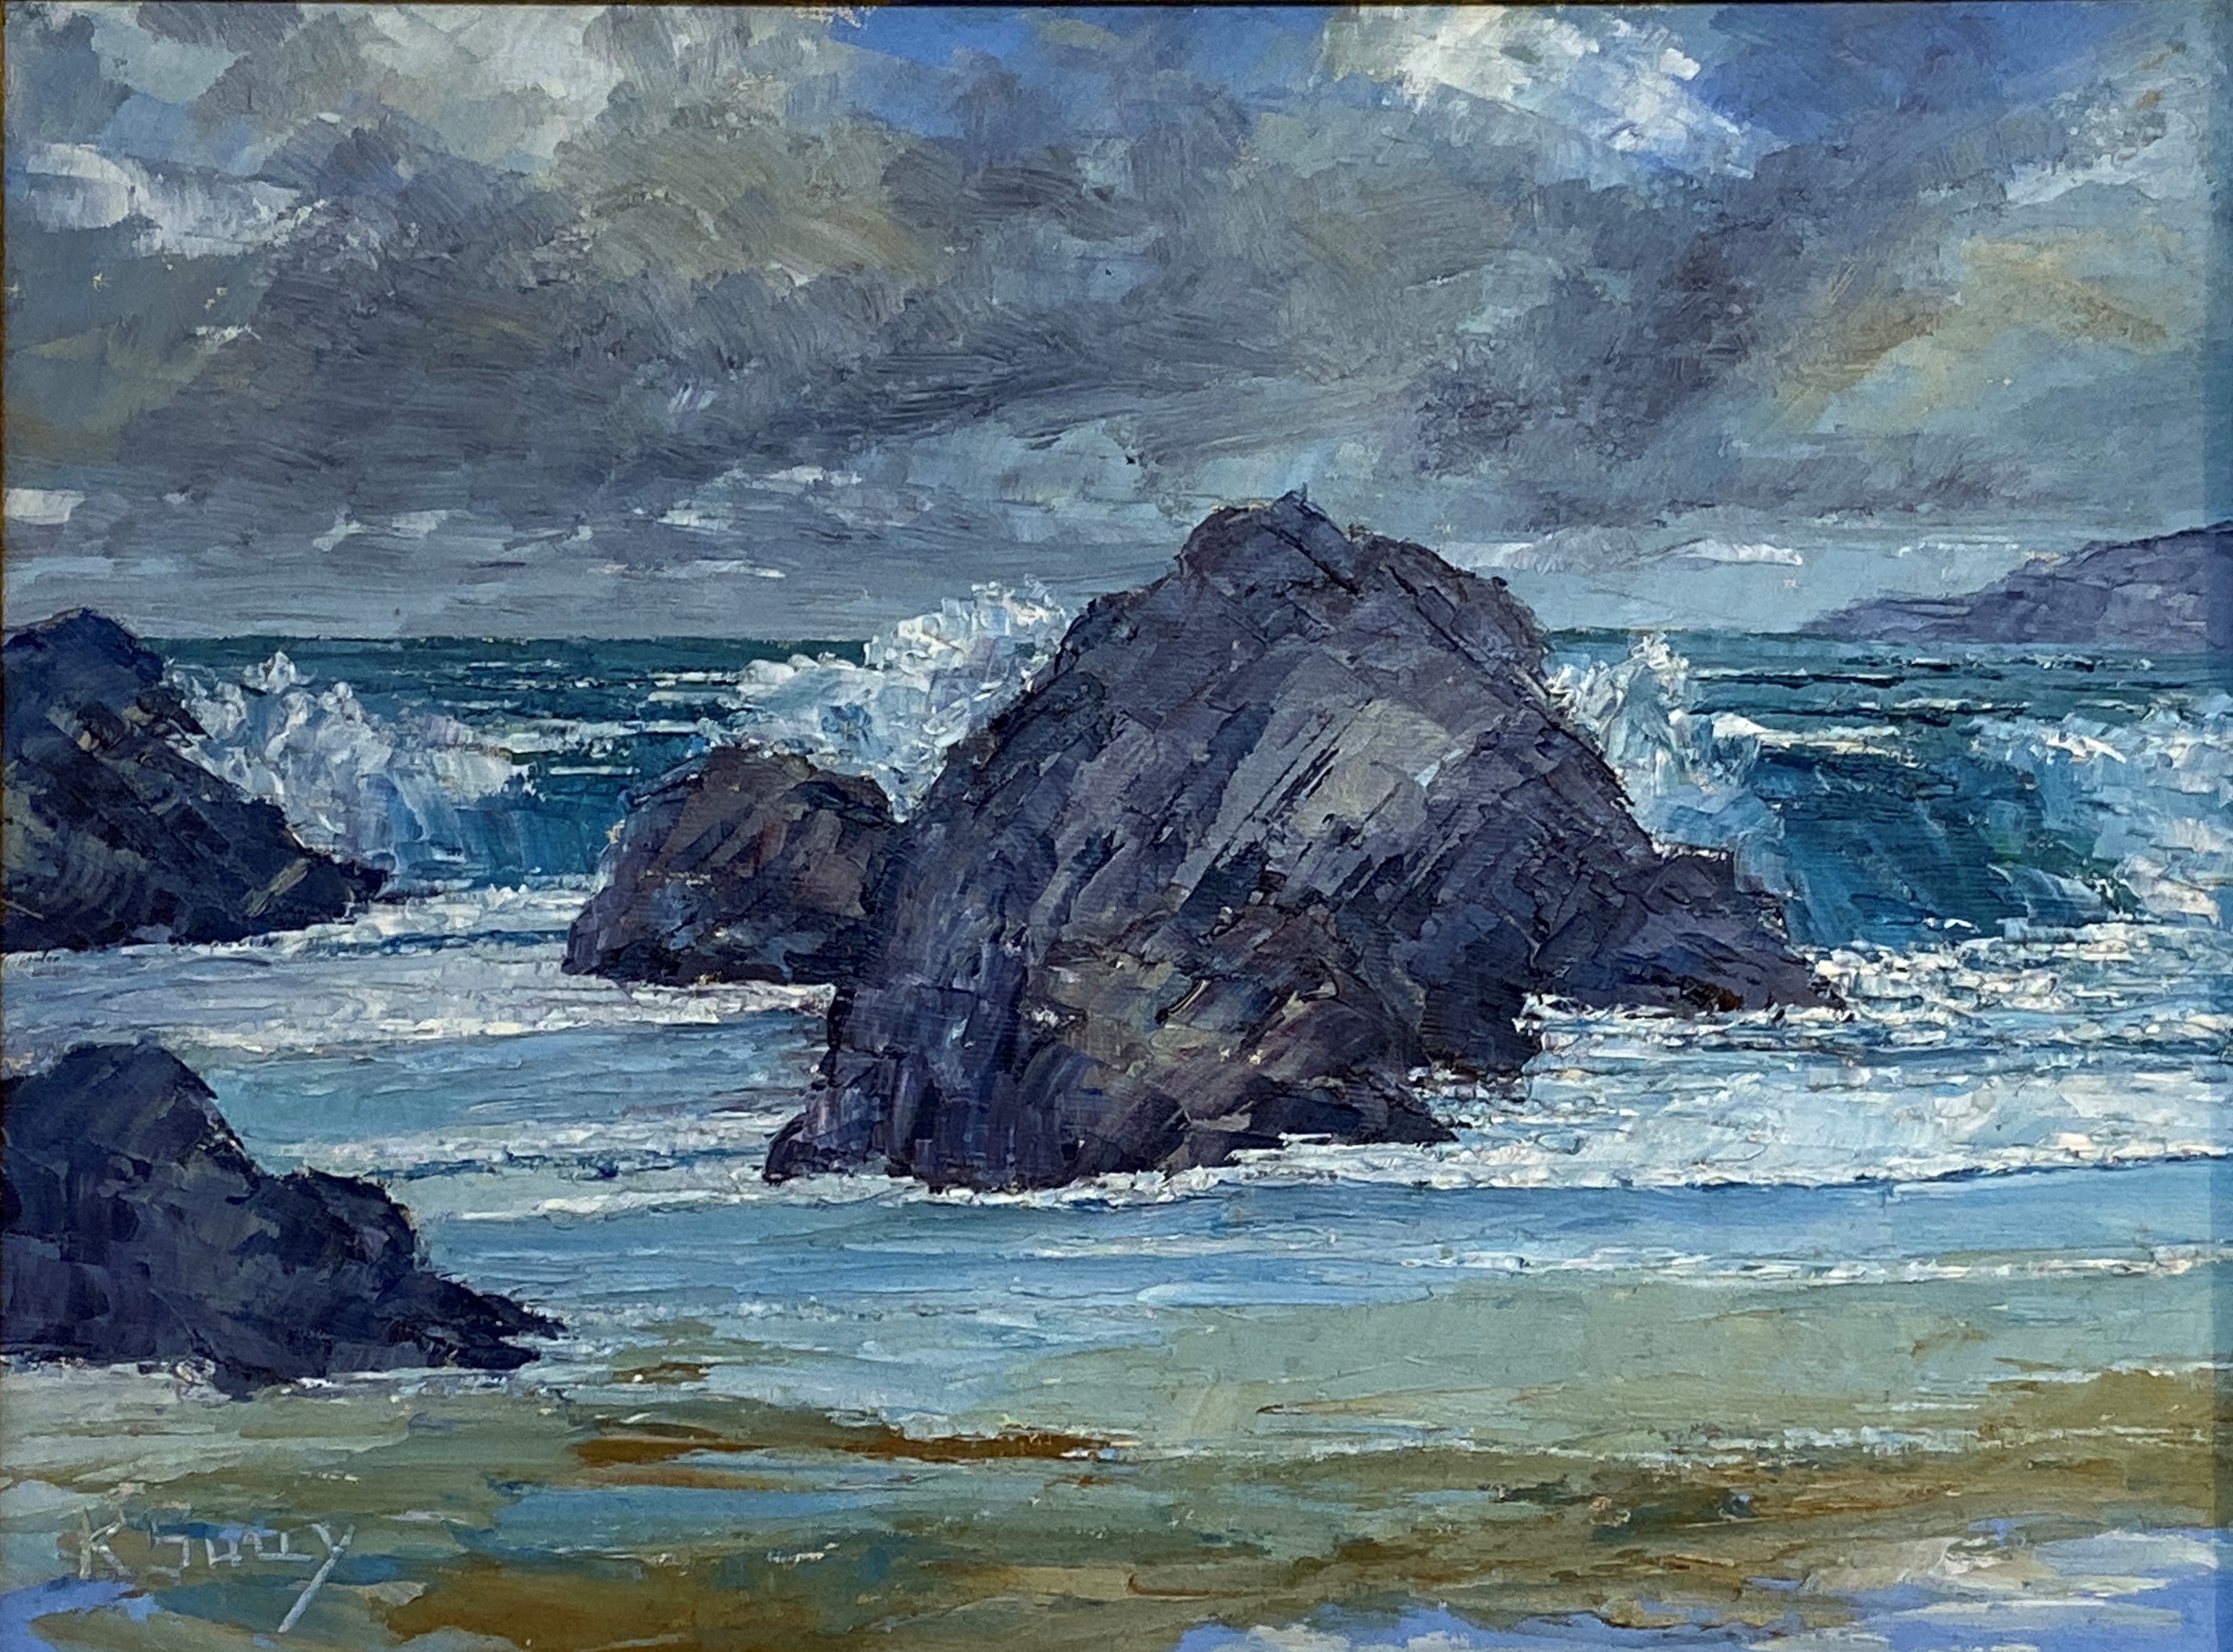 K Shuy - rocky shore, oil on board, signed lower left, (29.5cm x 39cm), in a decoratively moulded